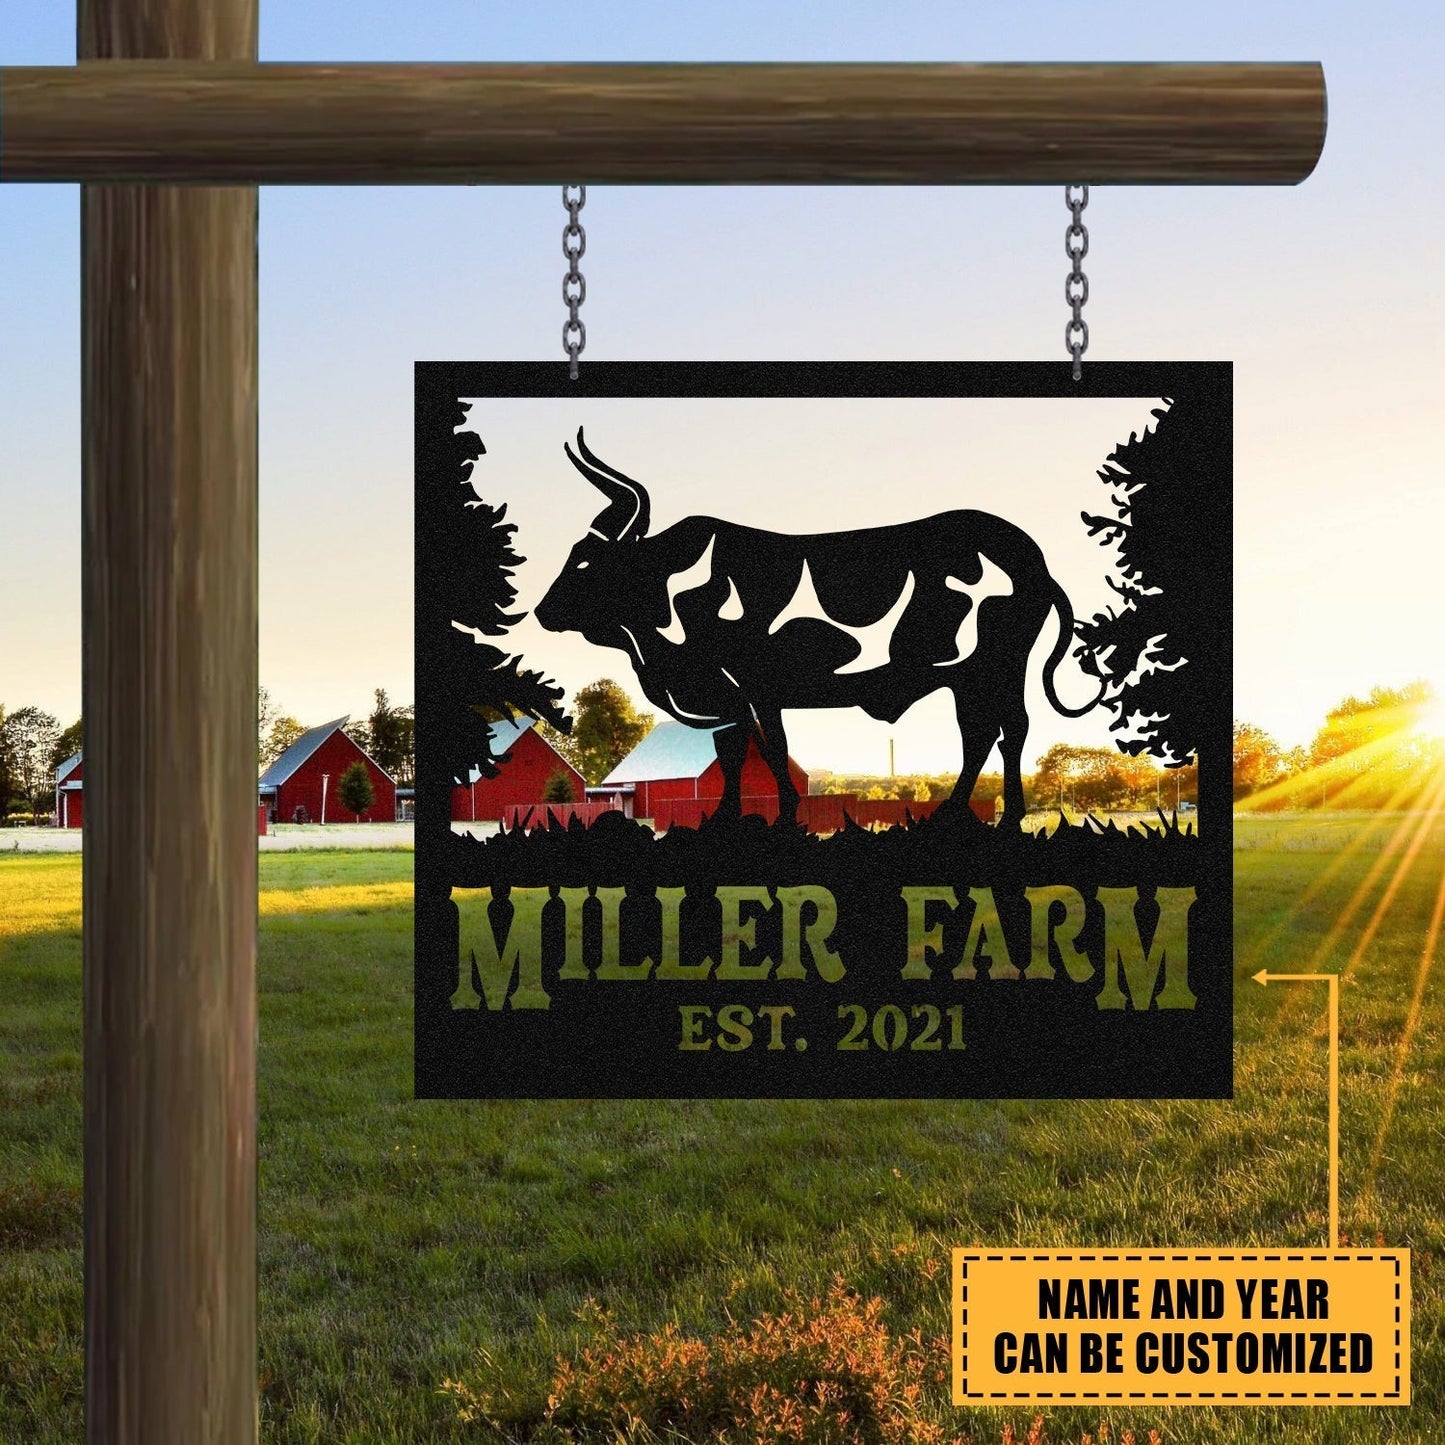 Personalized Metal Farm Sign Bull Monogram Custom Outdoor Farmhouse Front Gate Ranch Stable Wall Decor Art Gift